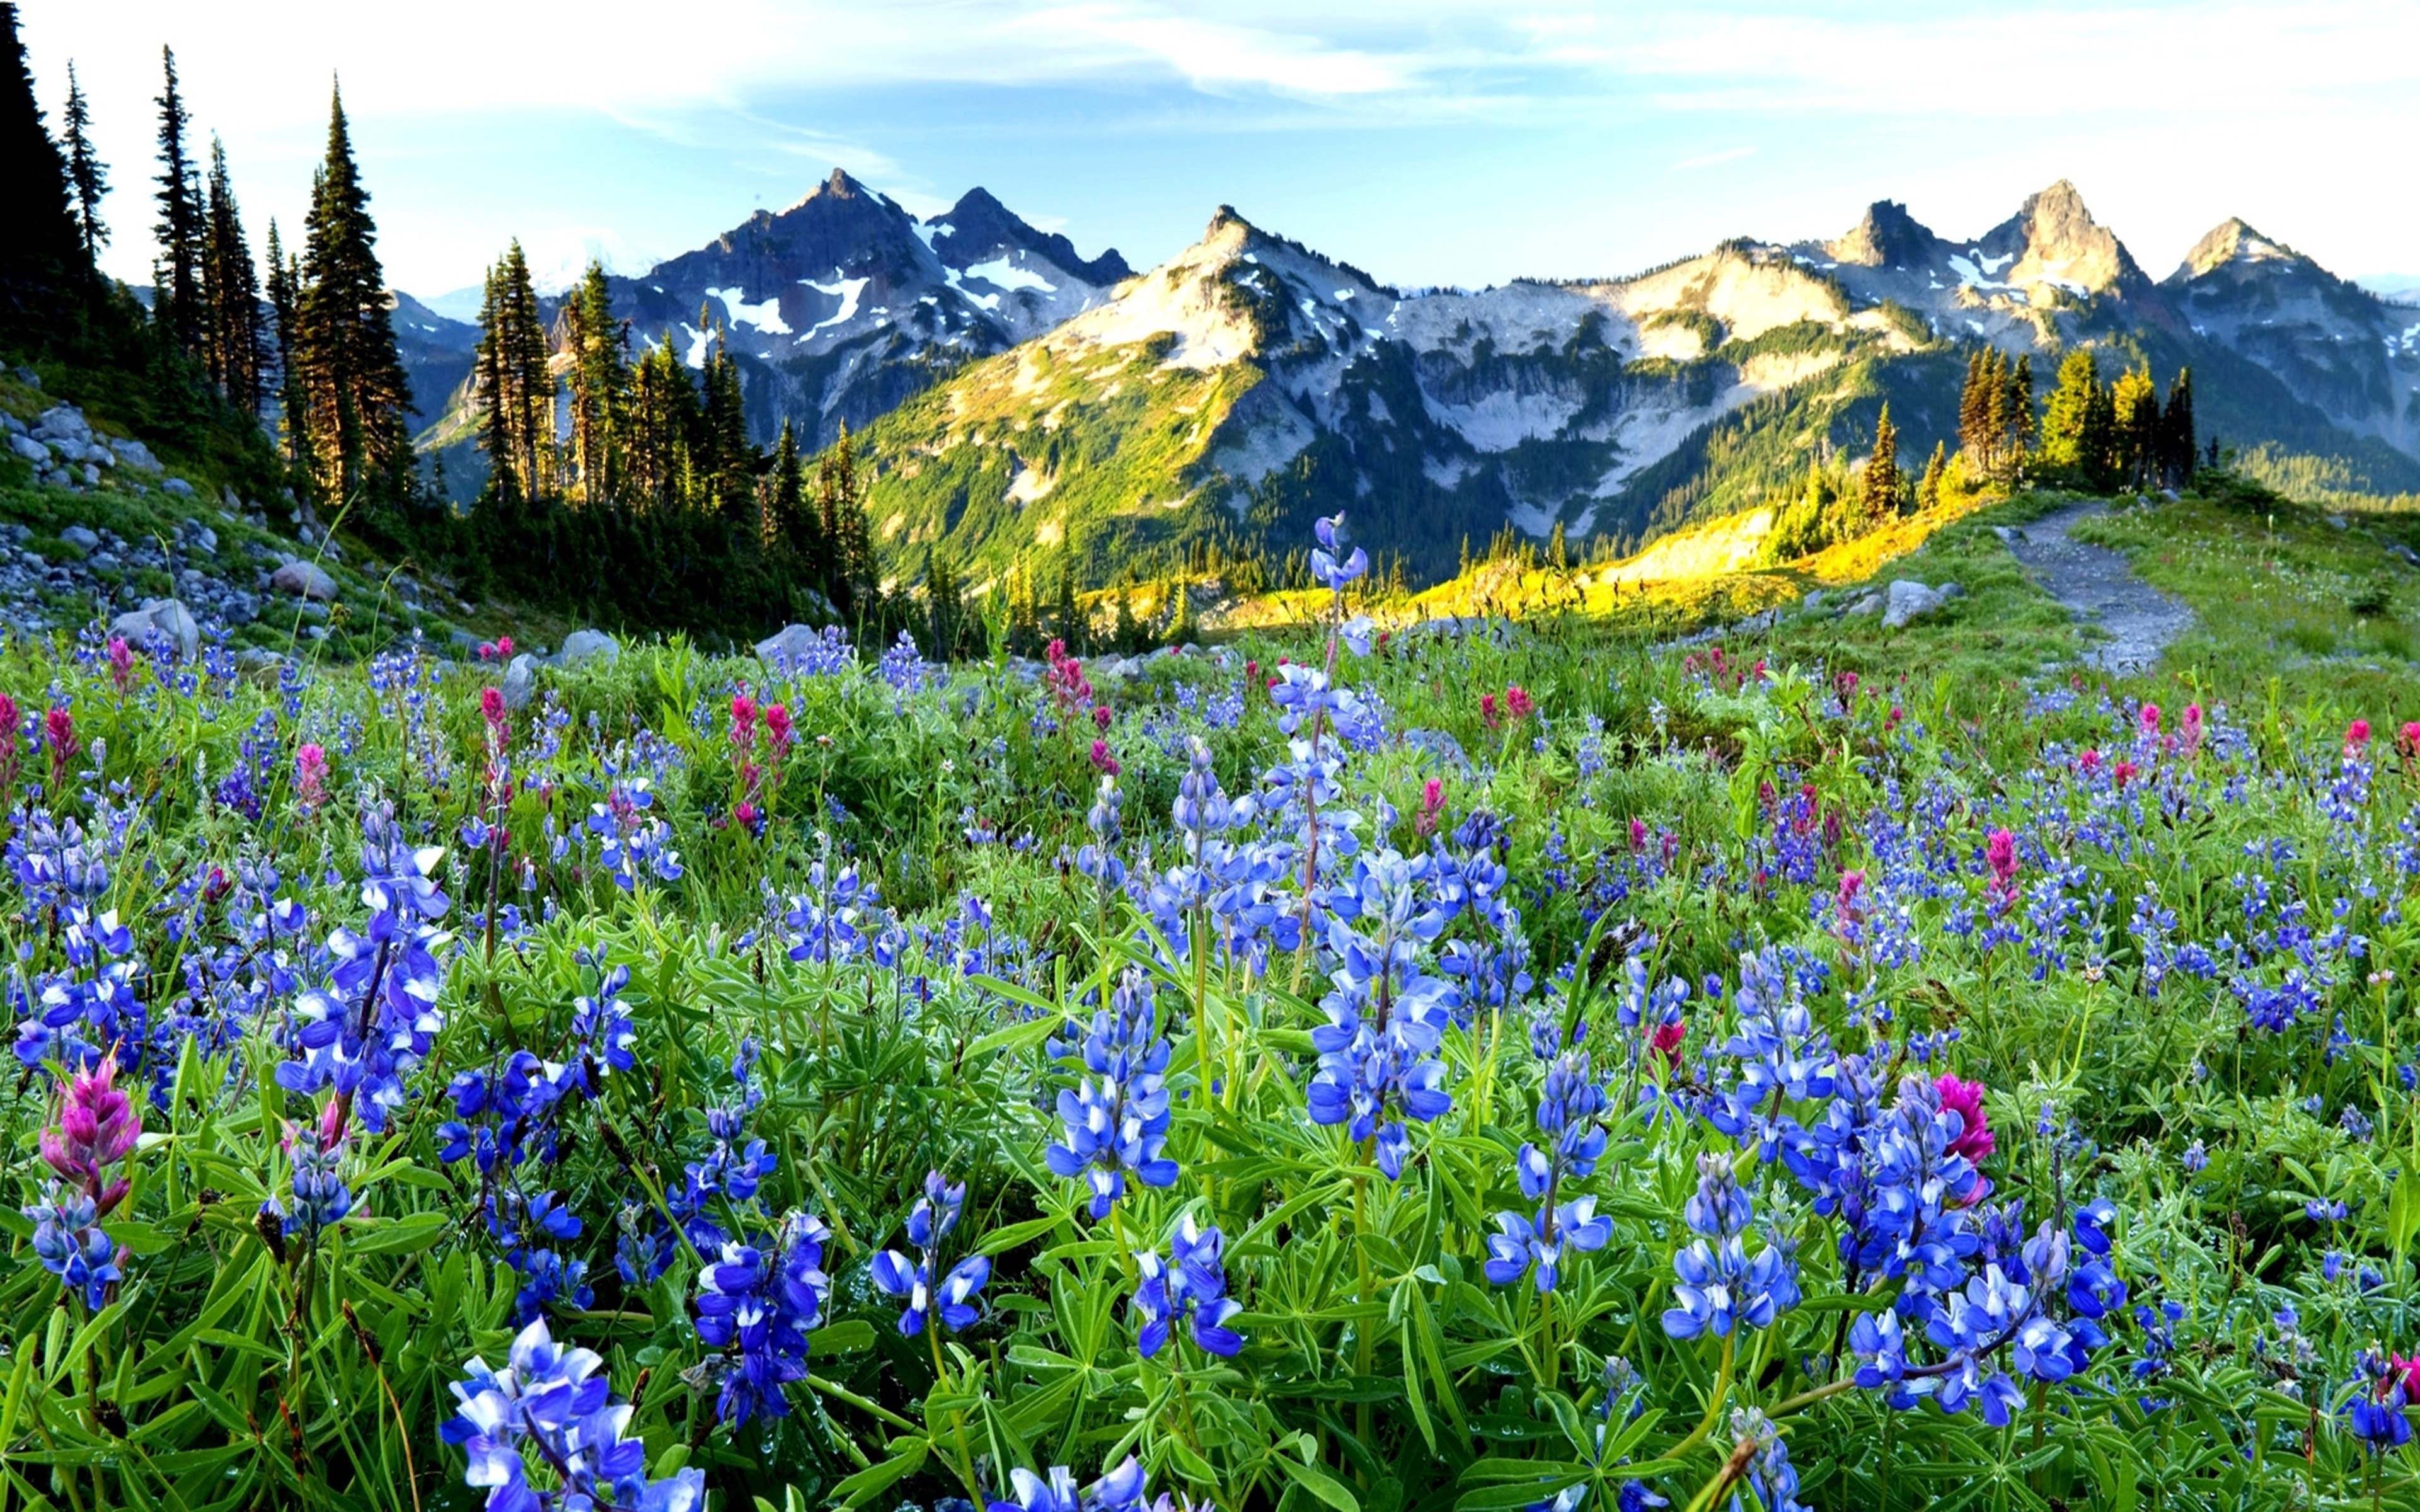 Spring Landscapes Wildflowers And The Tatoosh Range At Sunrise Mt. Rainier National Park Washington HD Wallpaper For Mobile iPhone Android 3840x2400, Wallpaper13.com